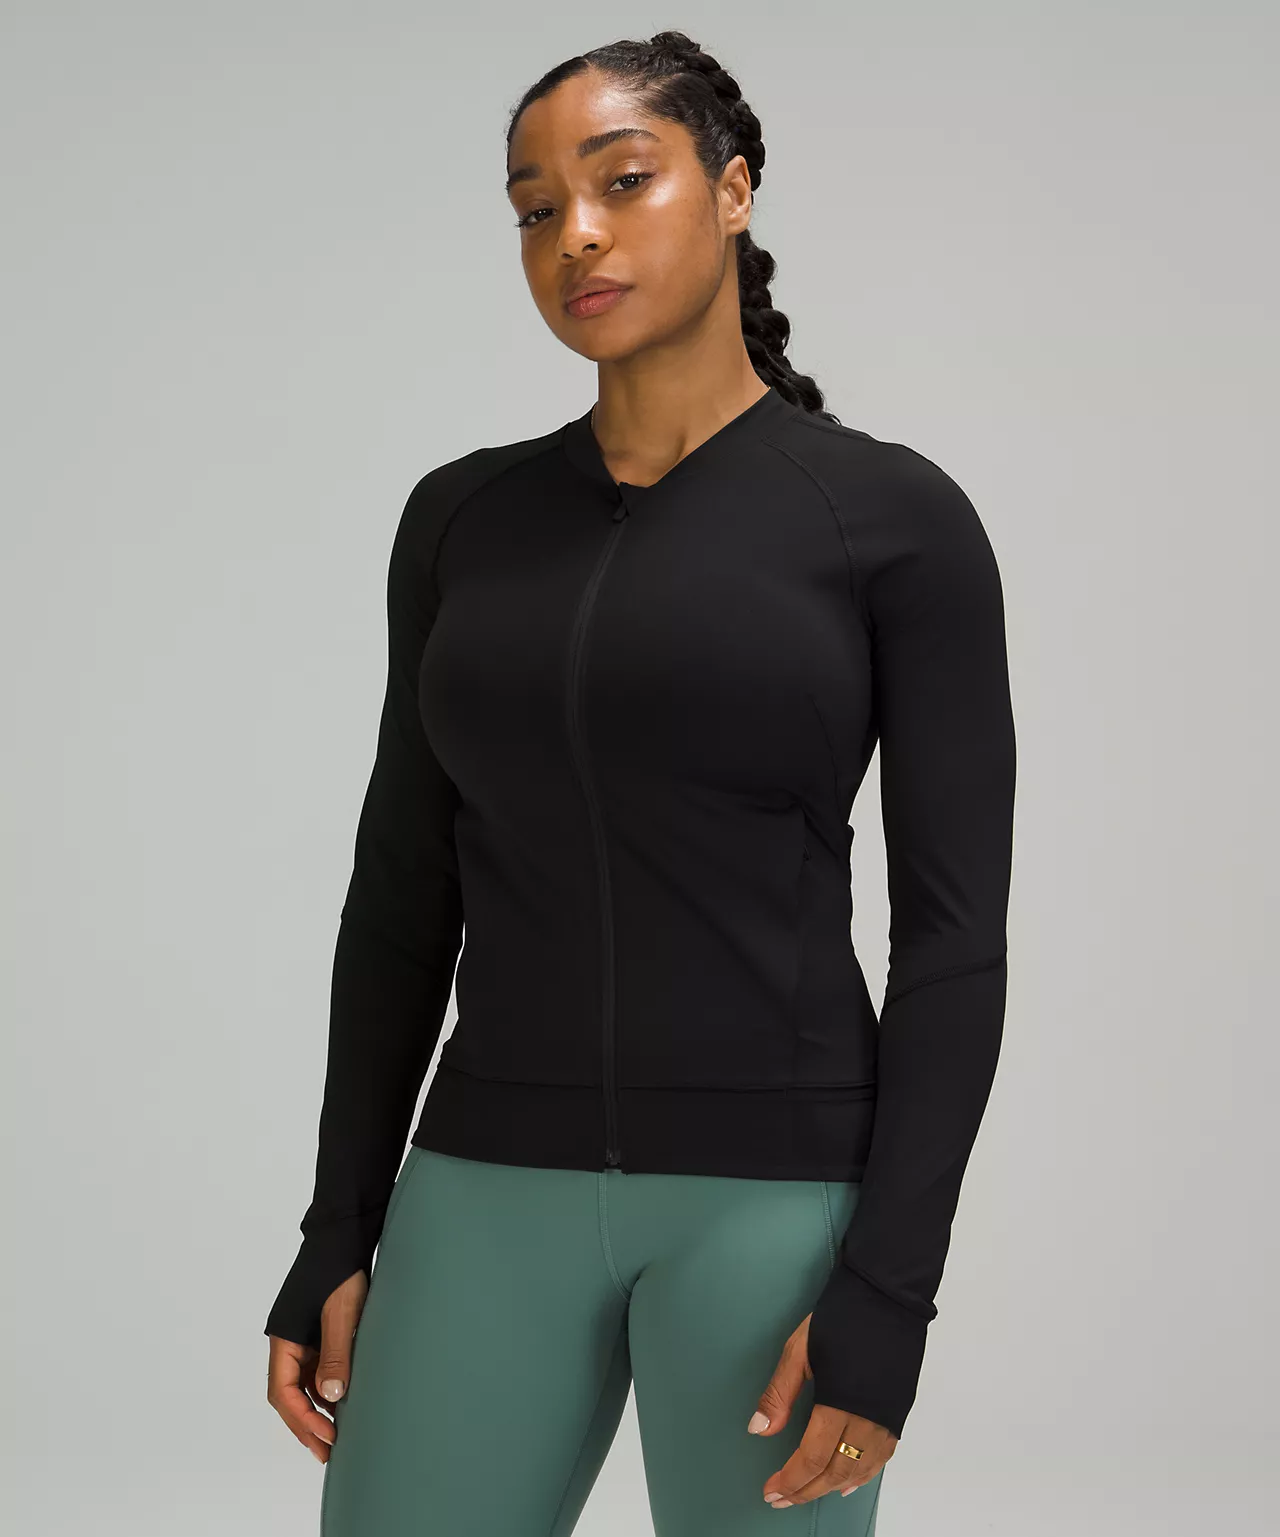 16 Fall Outerwear Pieces From Lululemon | Who What Wear